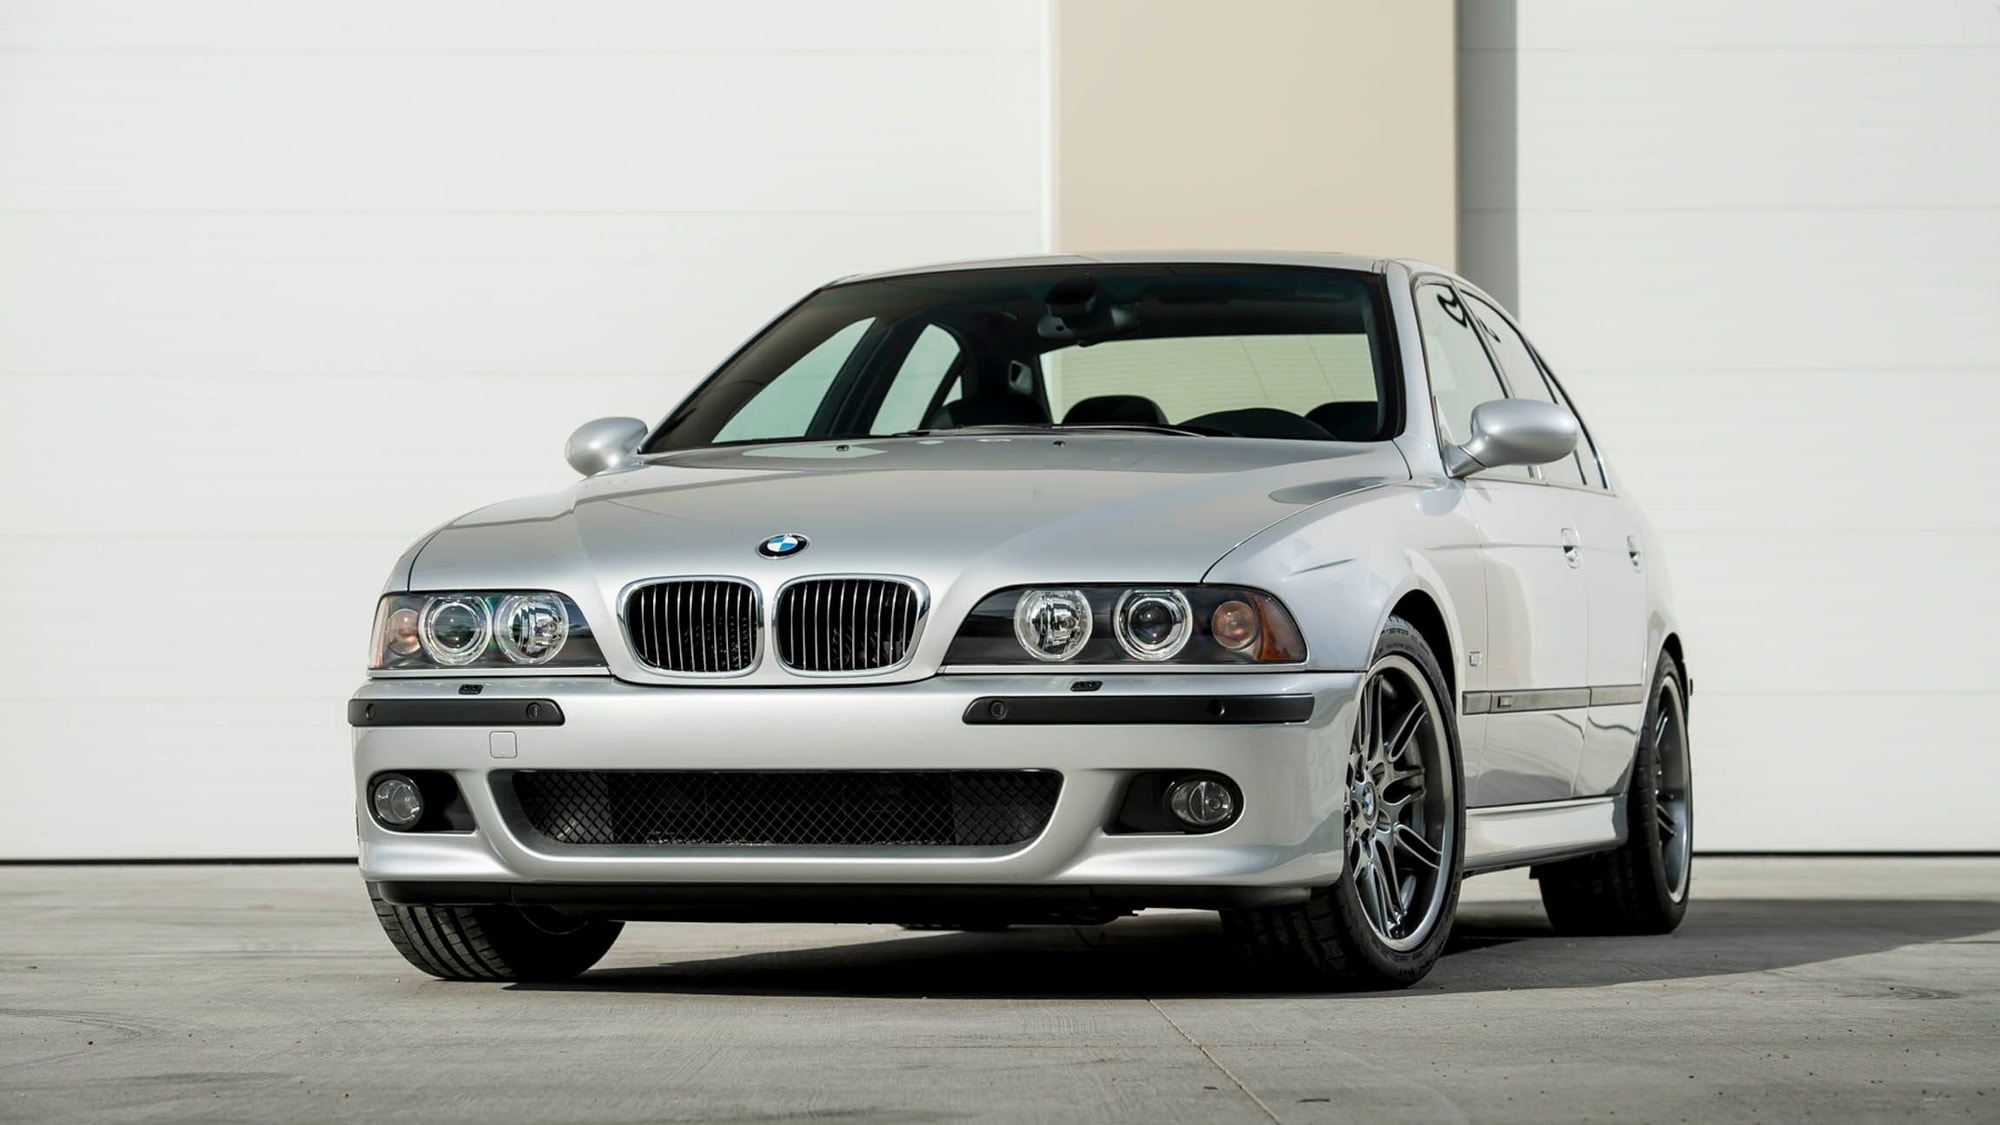 2002 BMW M5 heads to Gooding auction